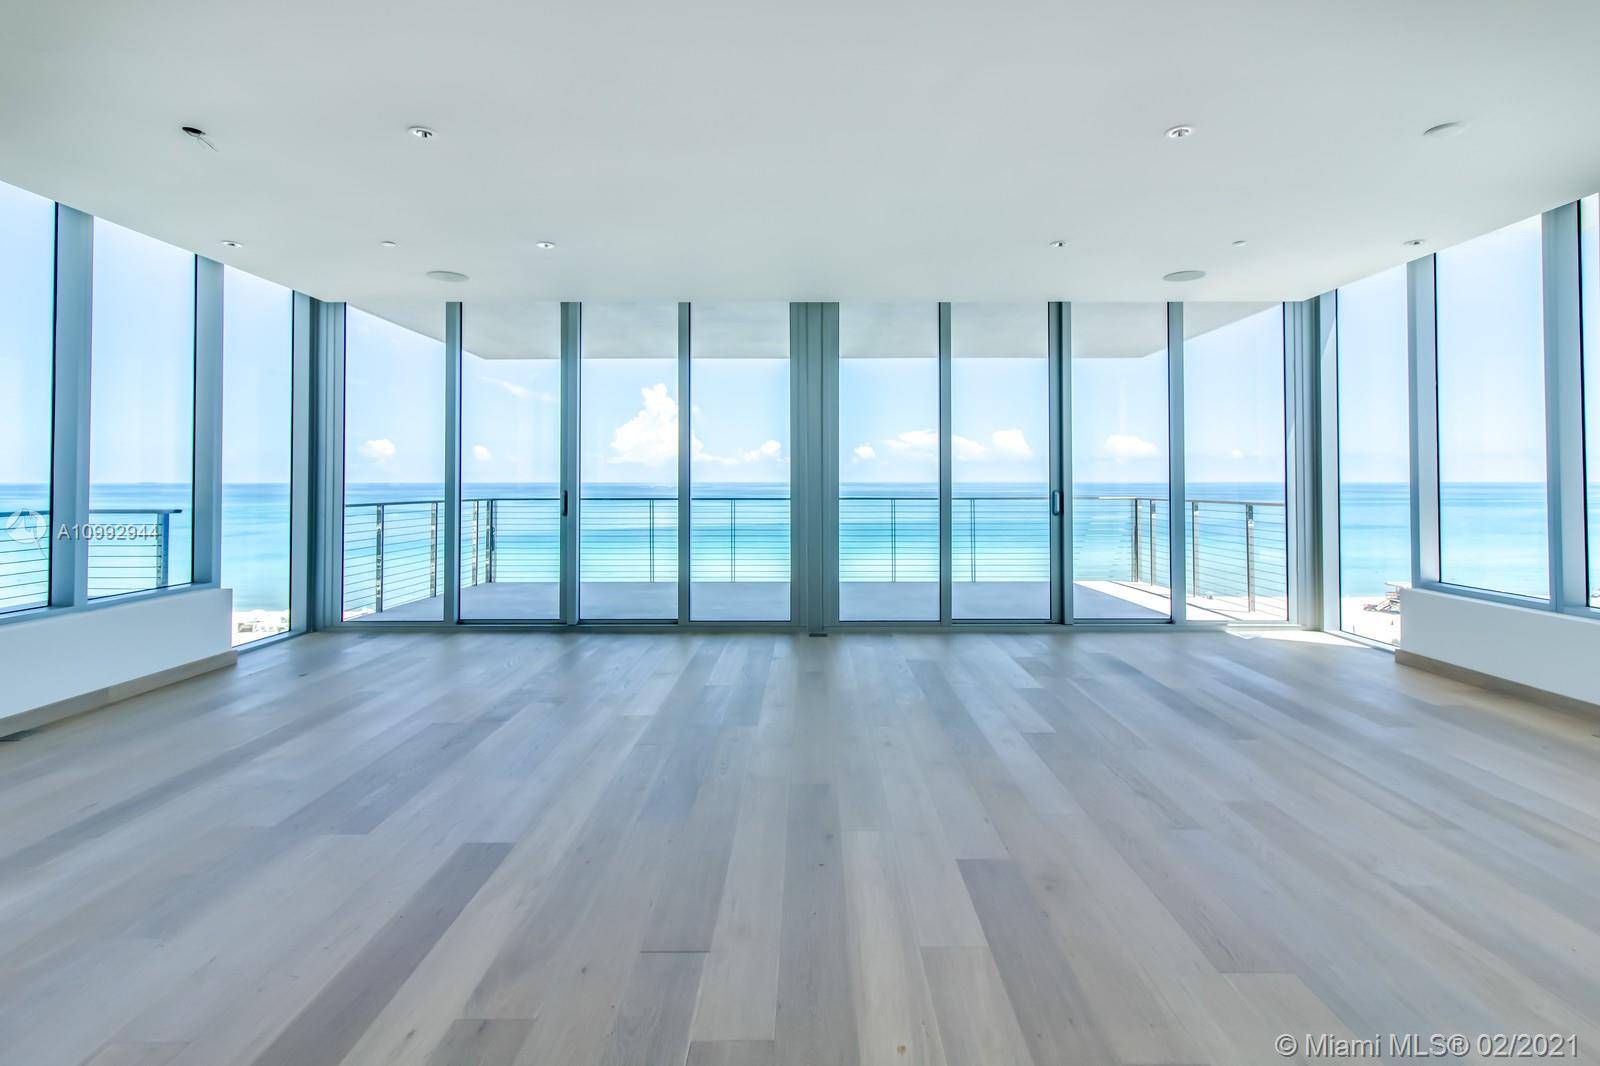 With only 8 units in the building, 1 p flr, Beach House 8 is the most luxurious boutique condo in Miami Beach.